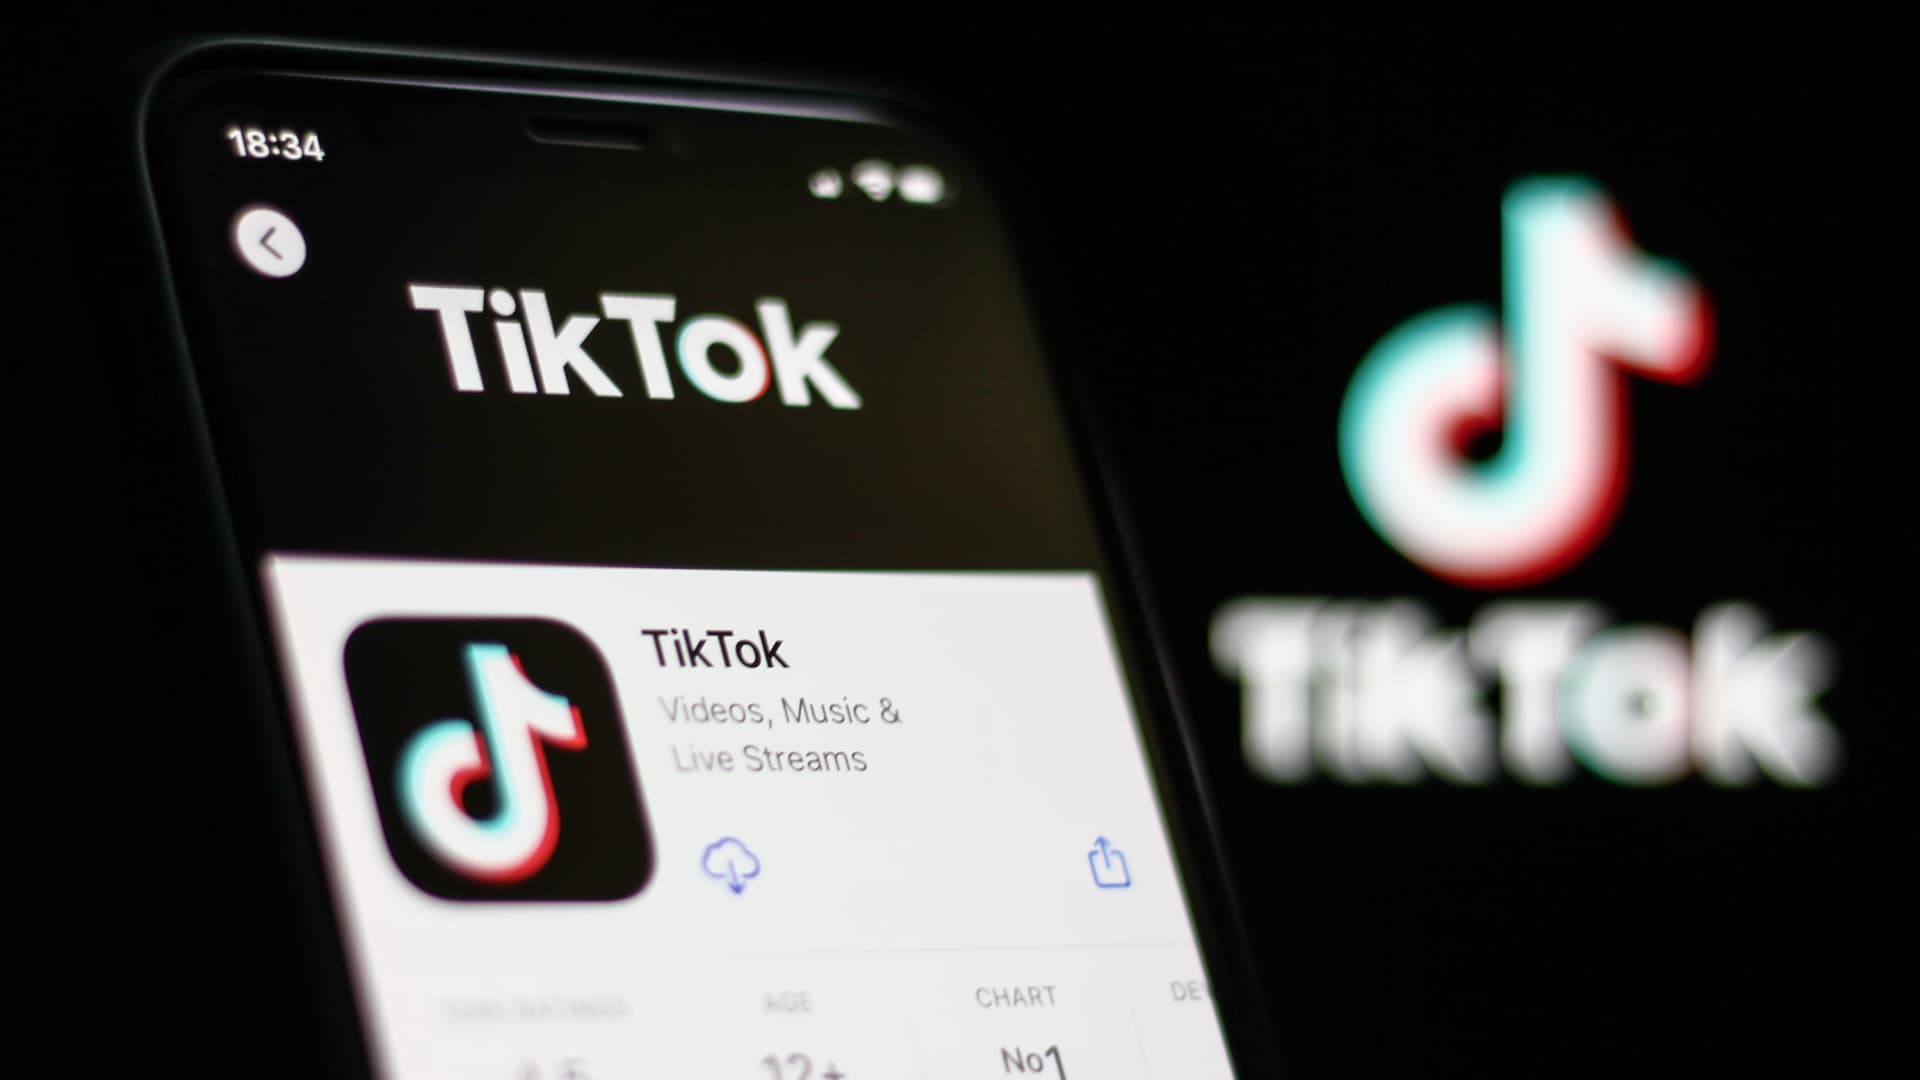 What Is Branded Content On Tiktok